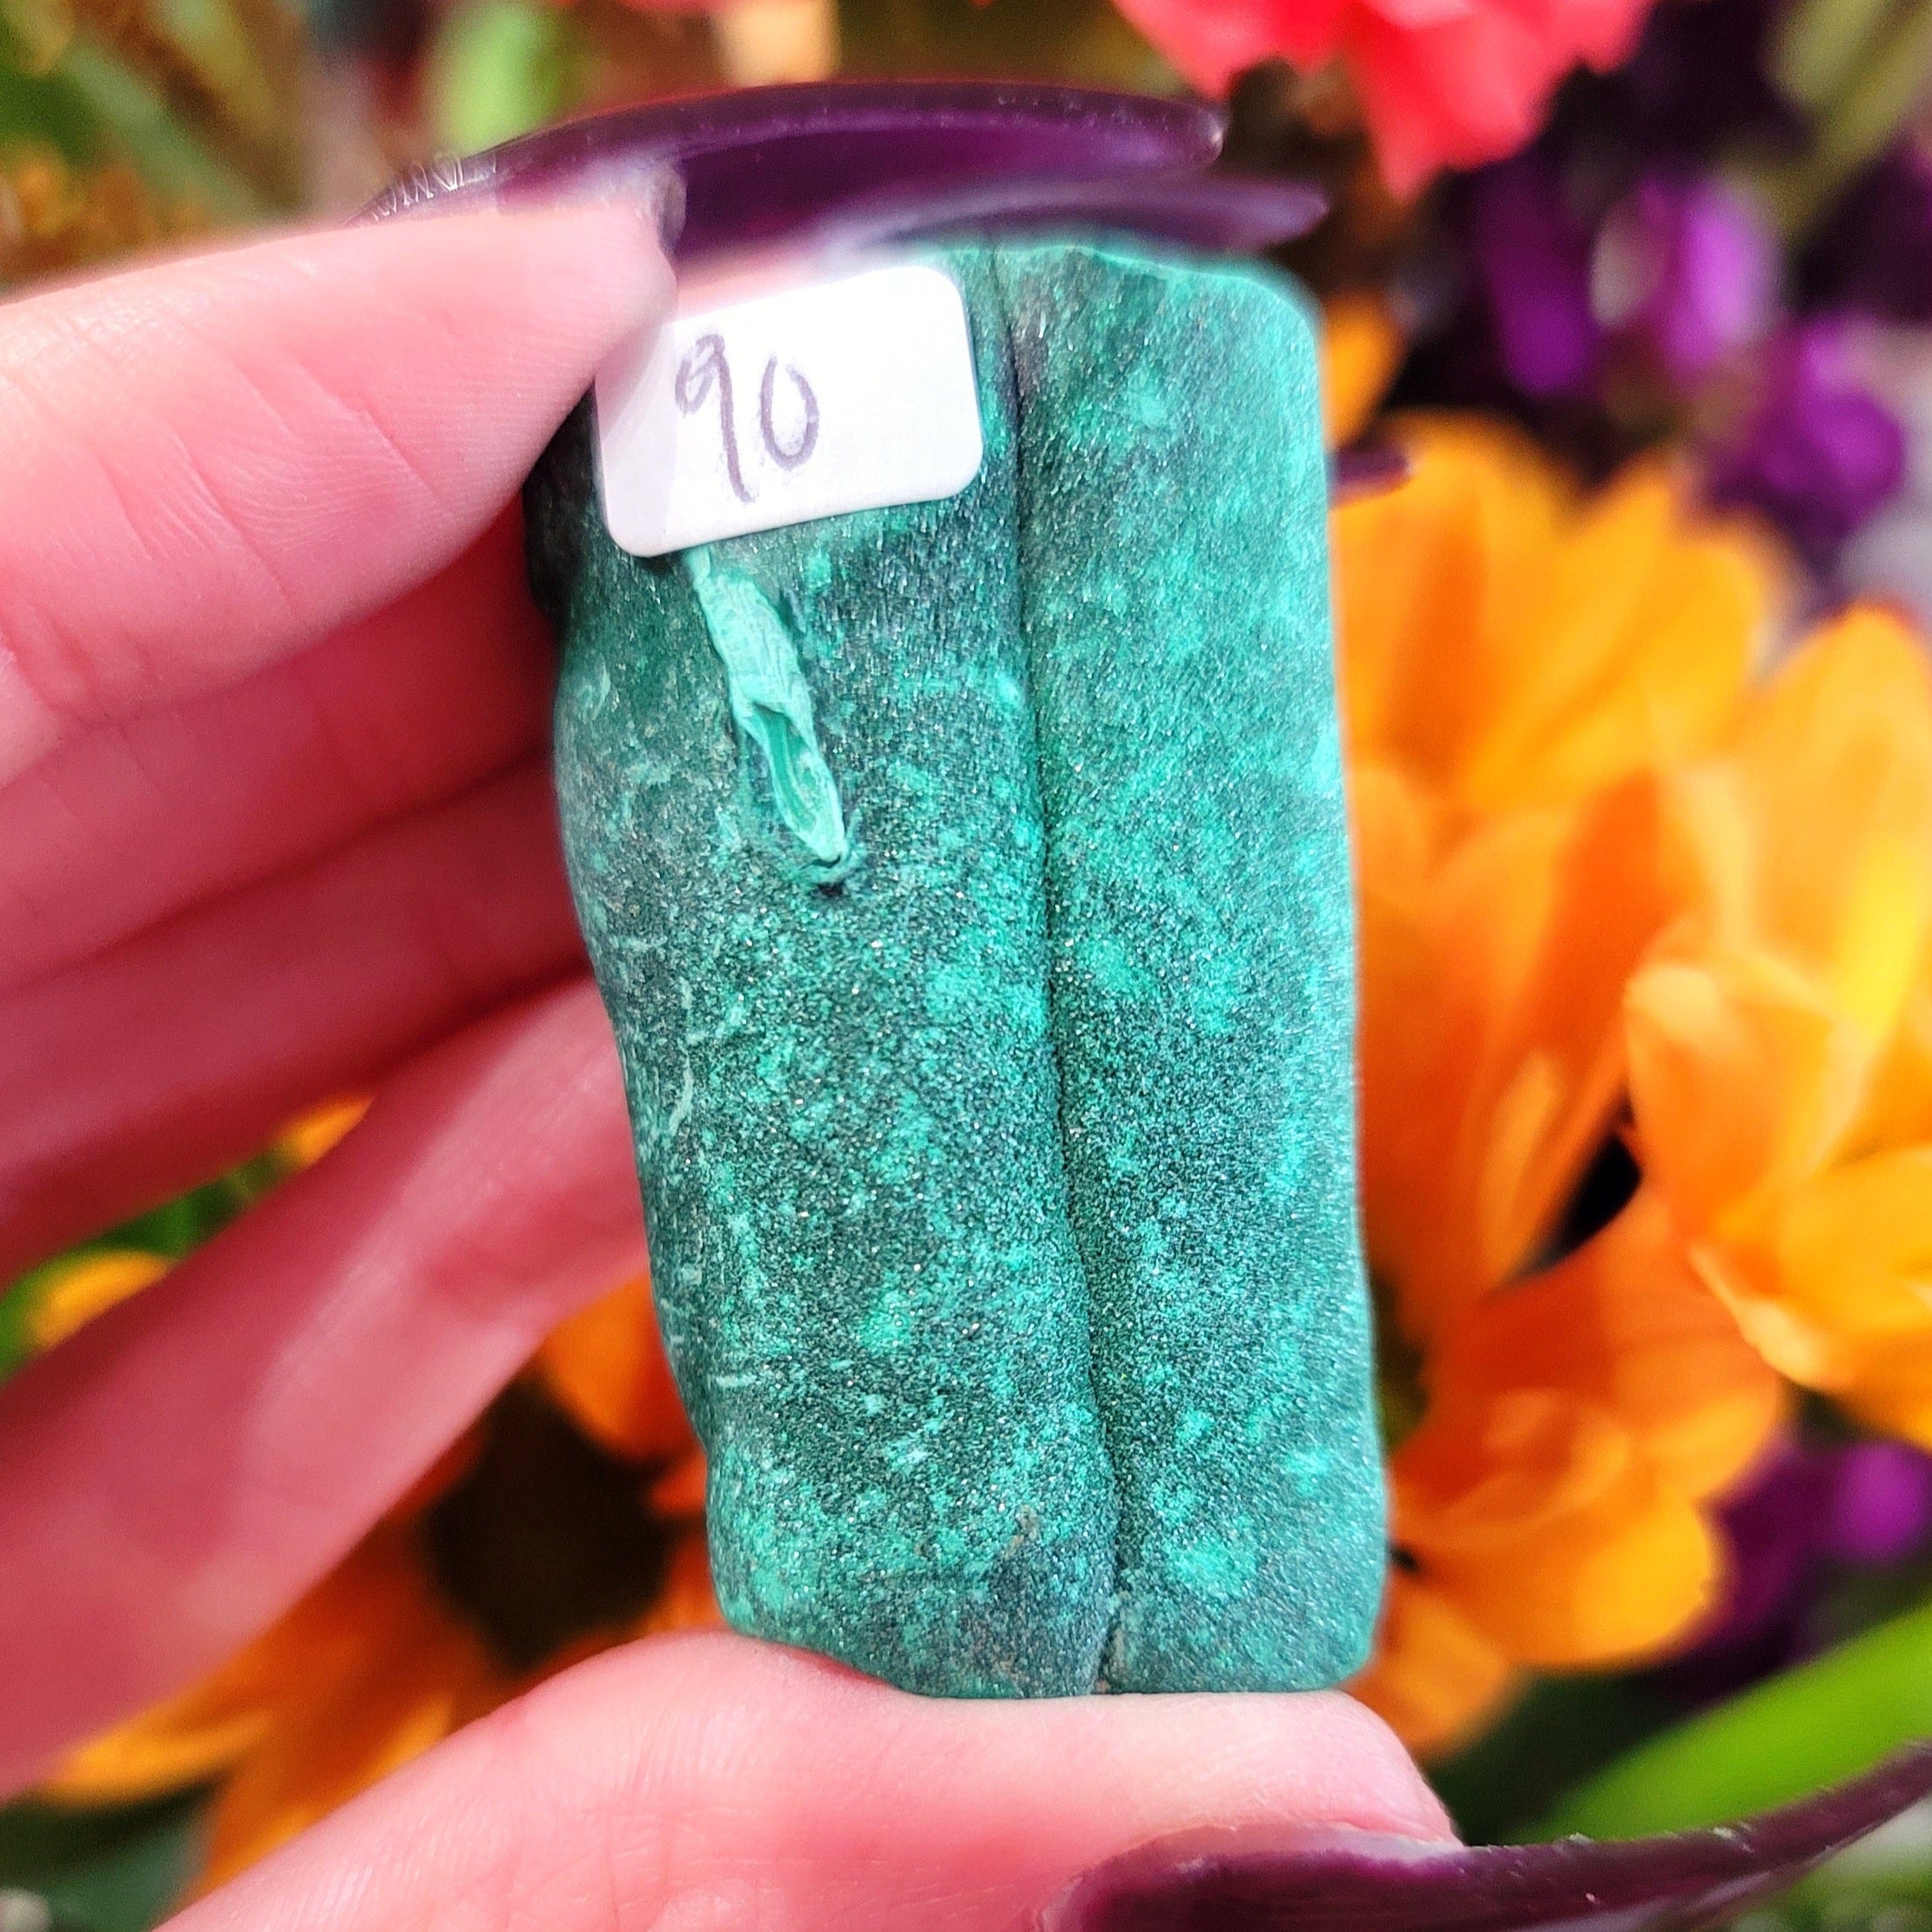 Incredible Sparkly Malachite Stalactite Specimen for Abundance, Protection and Transformation